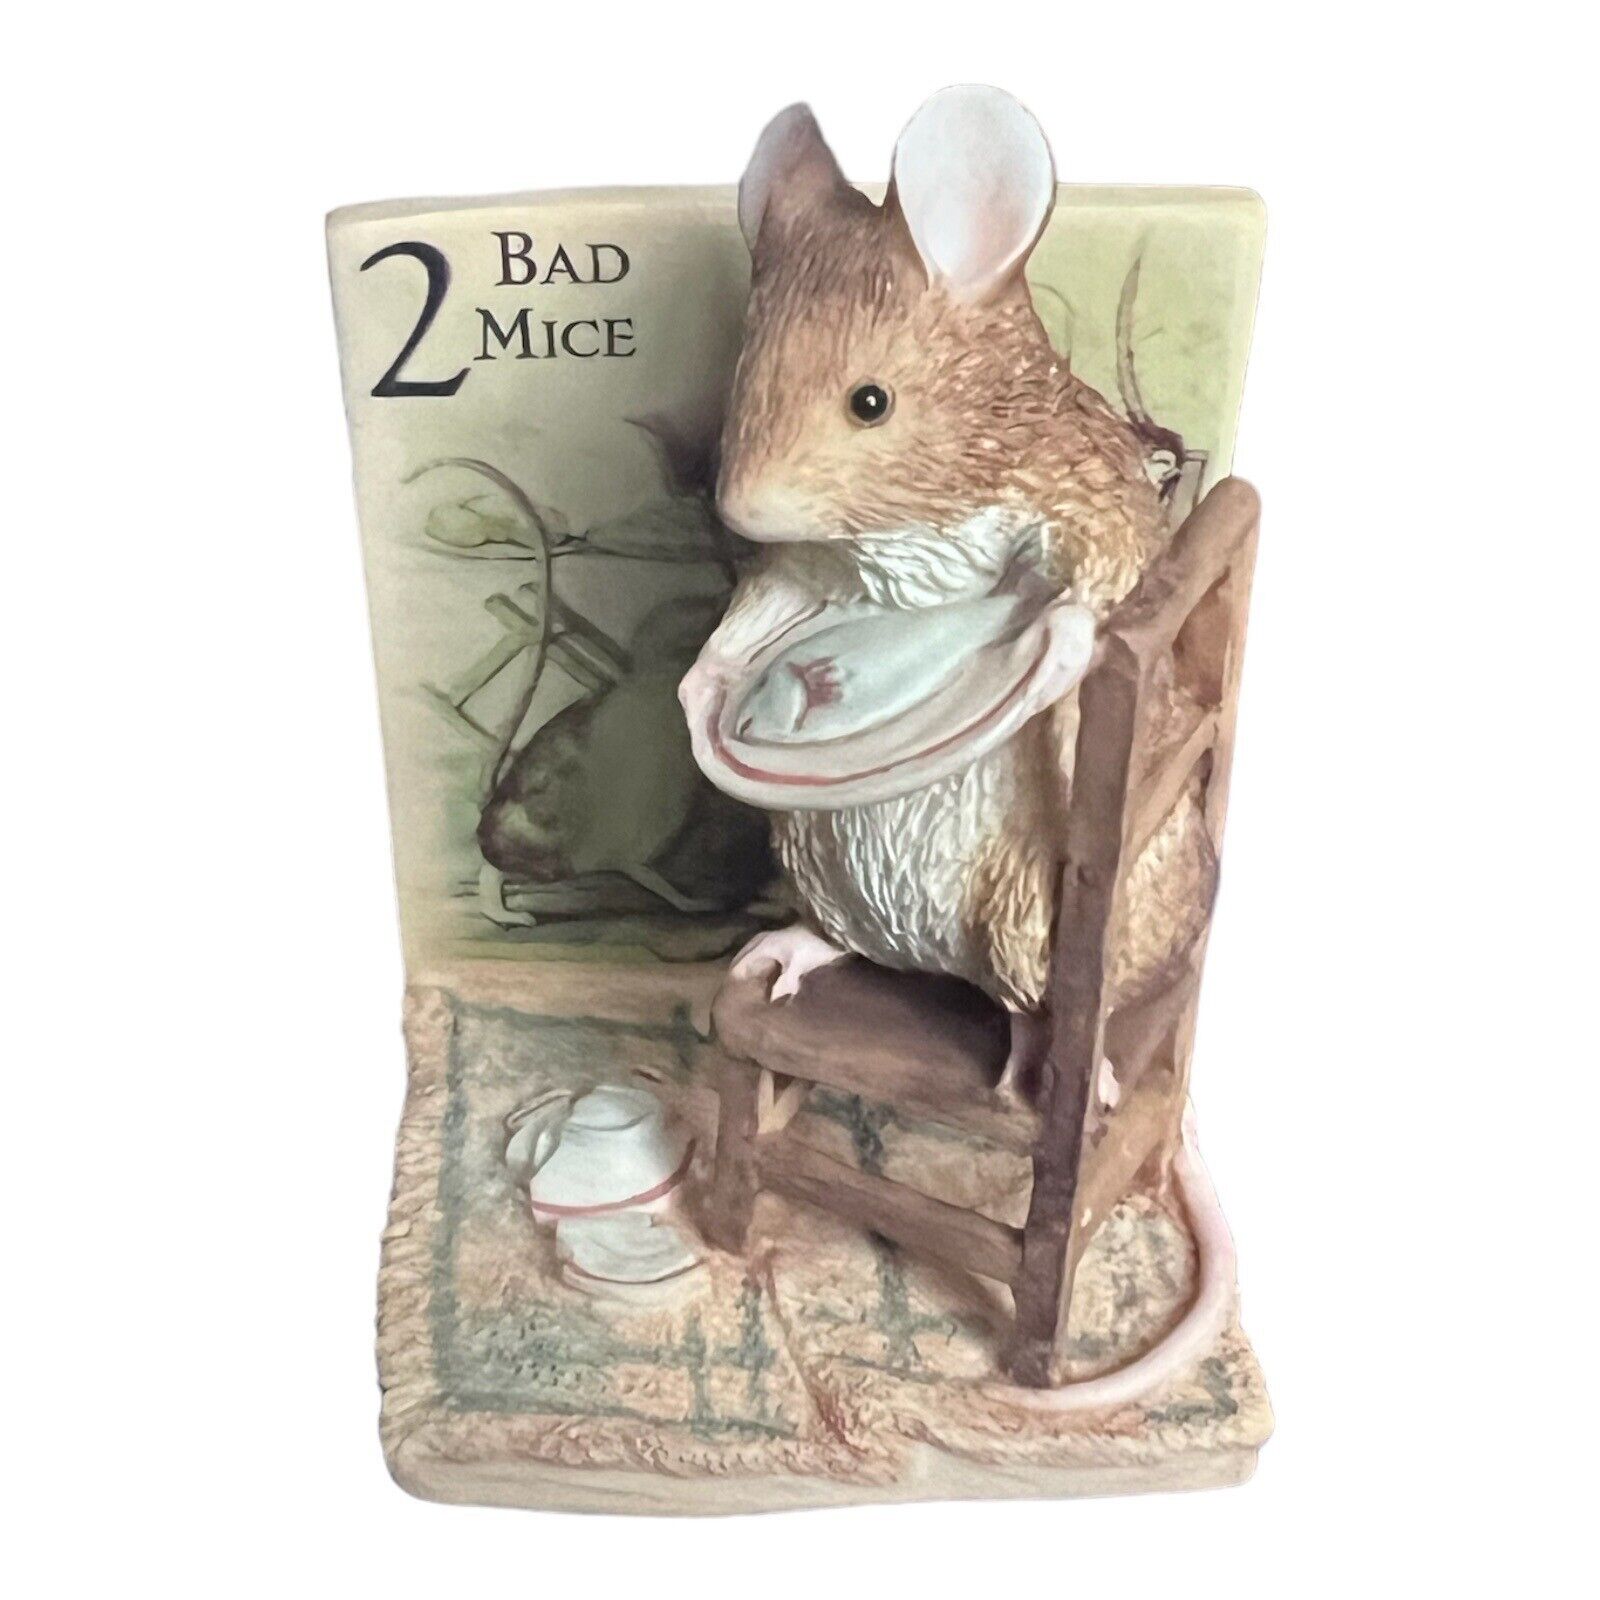 1997 The World of Beatrix Potter Two Bad Mice Figurine Vintage Numbered Figurine